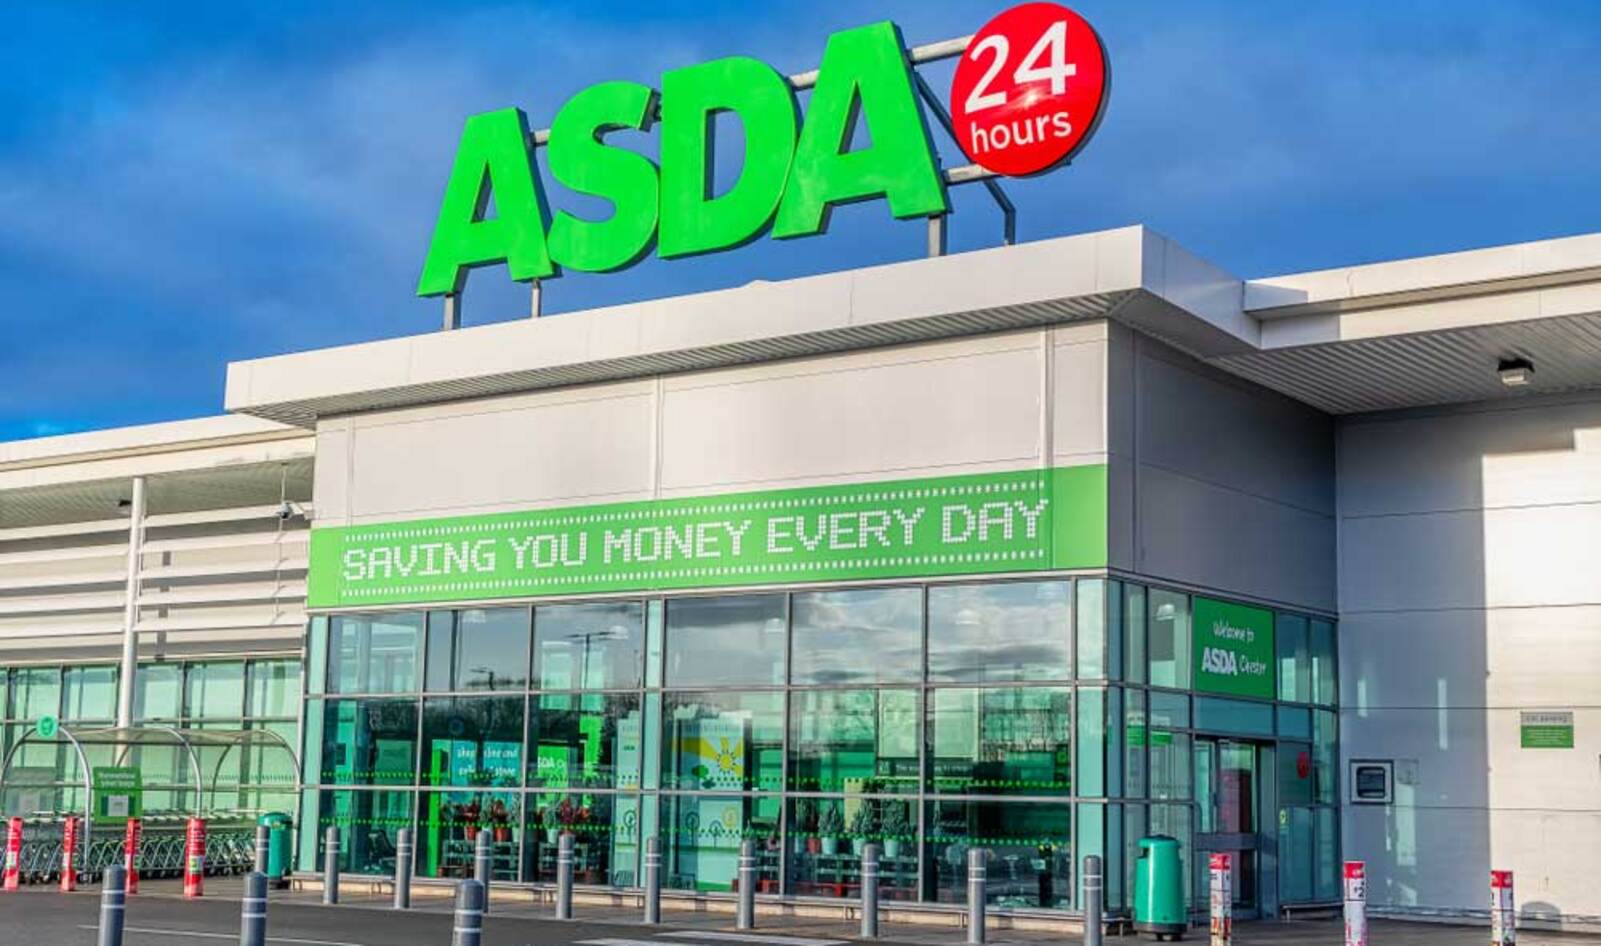 UK’s Second Largest Supermarket Chain to Shut Down Meat and Fish Counters